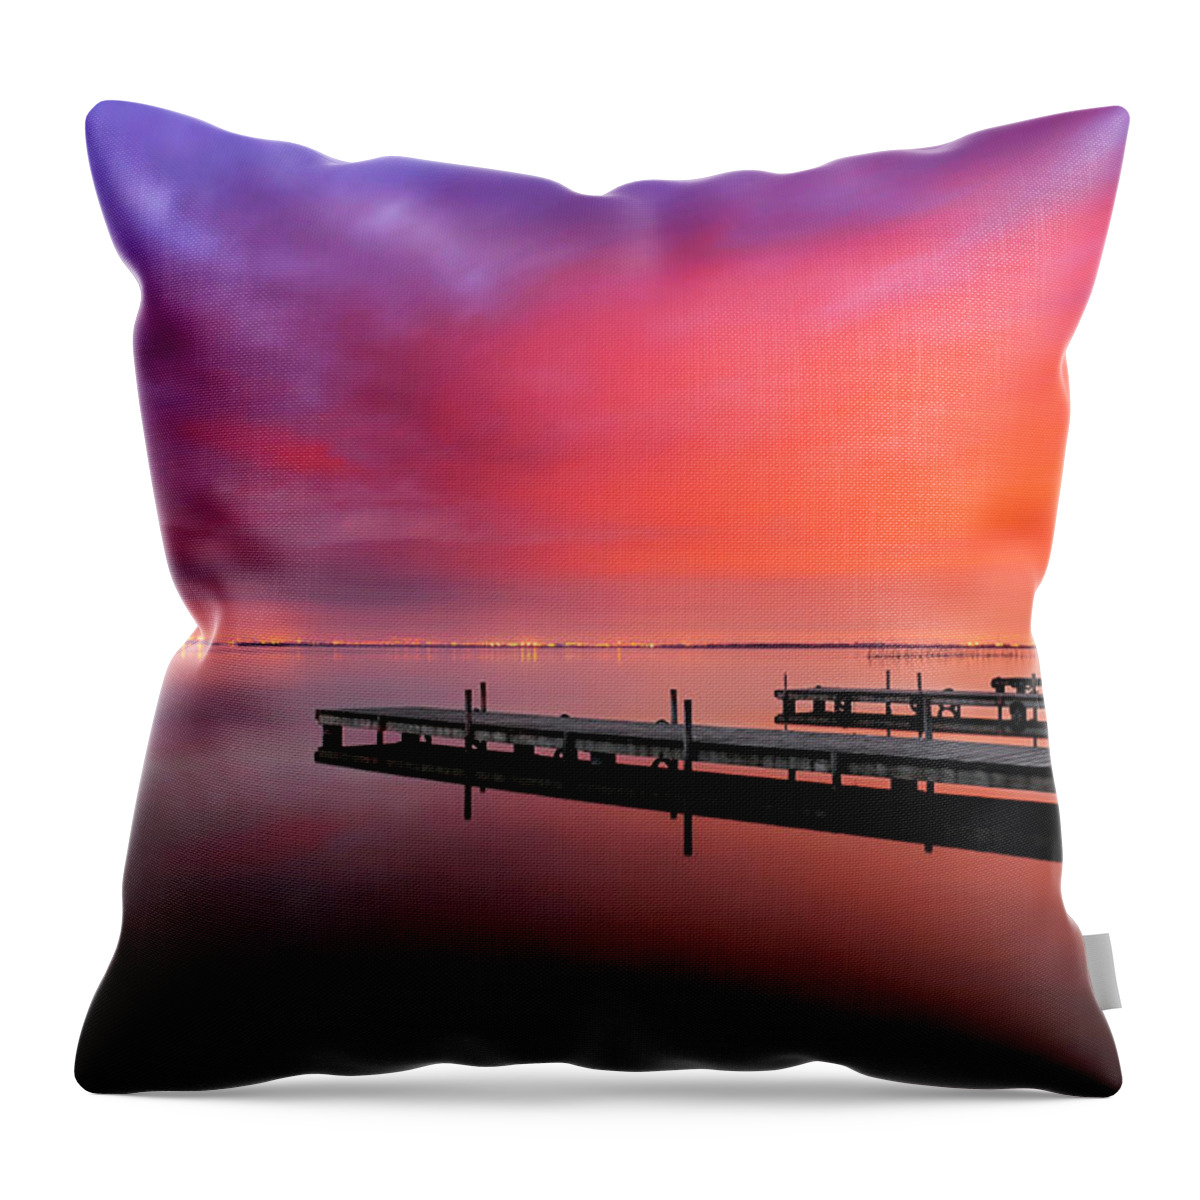 Scenics Throw Pillow featuring the photograph Dock Of Heaven by Manuel Orero Galan